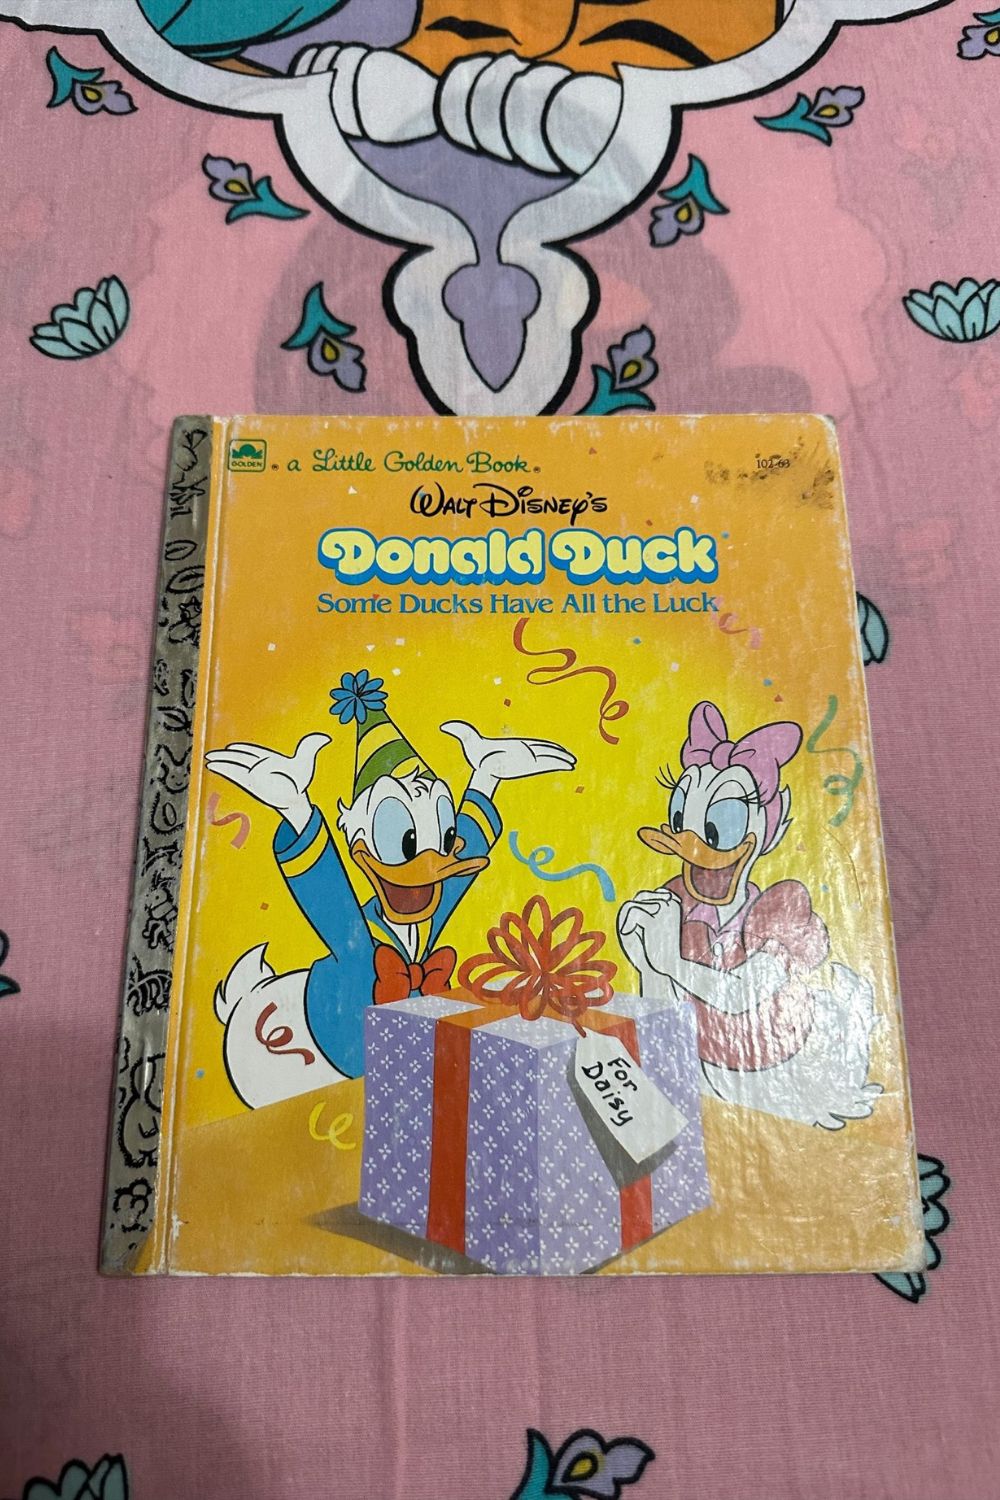 WALT DISNEY'S DONALD DUCK: SOME DUCKS HAVE ALL THE LUCK BOOK*